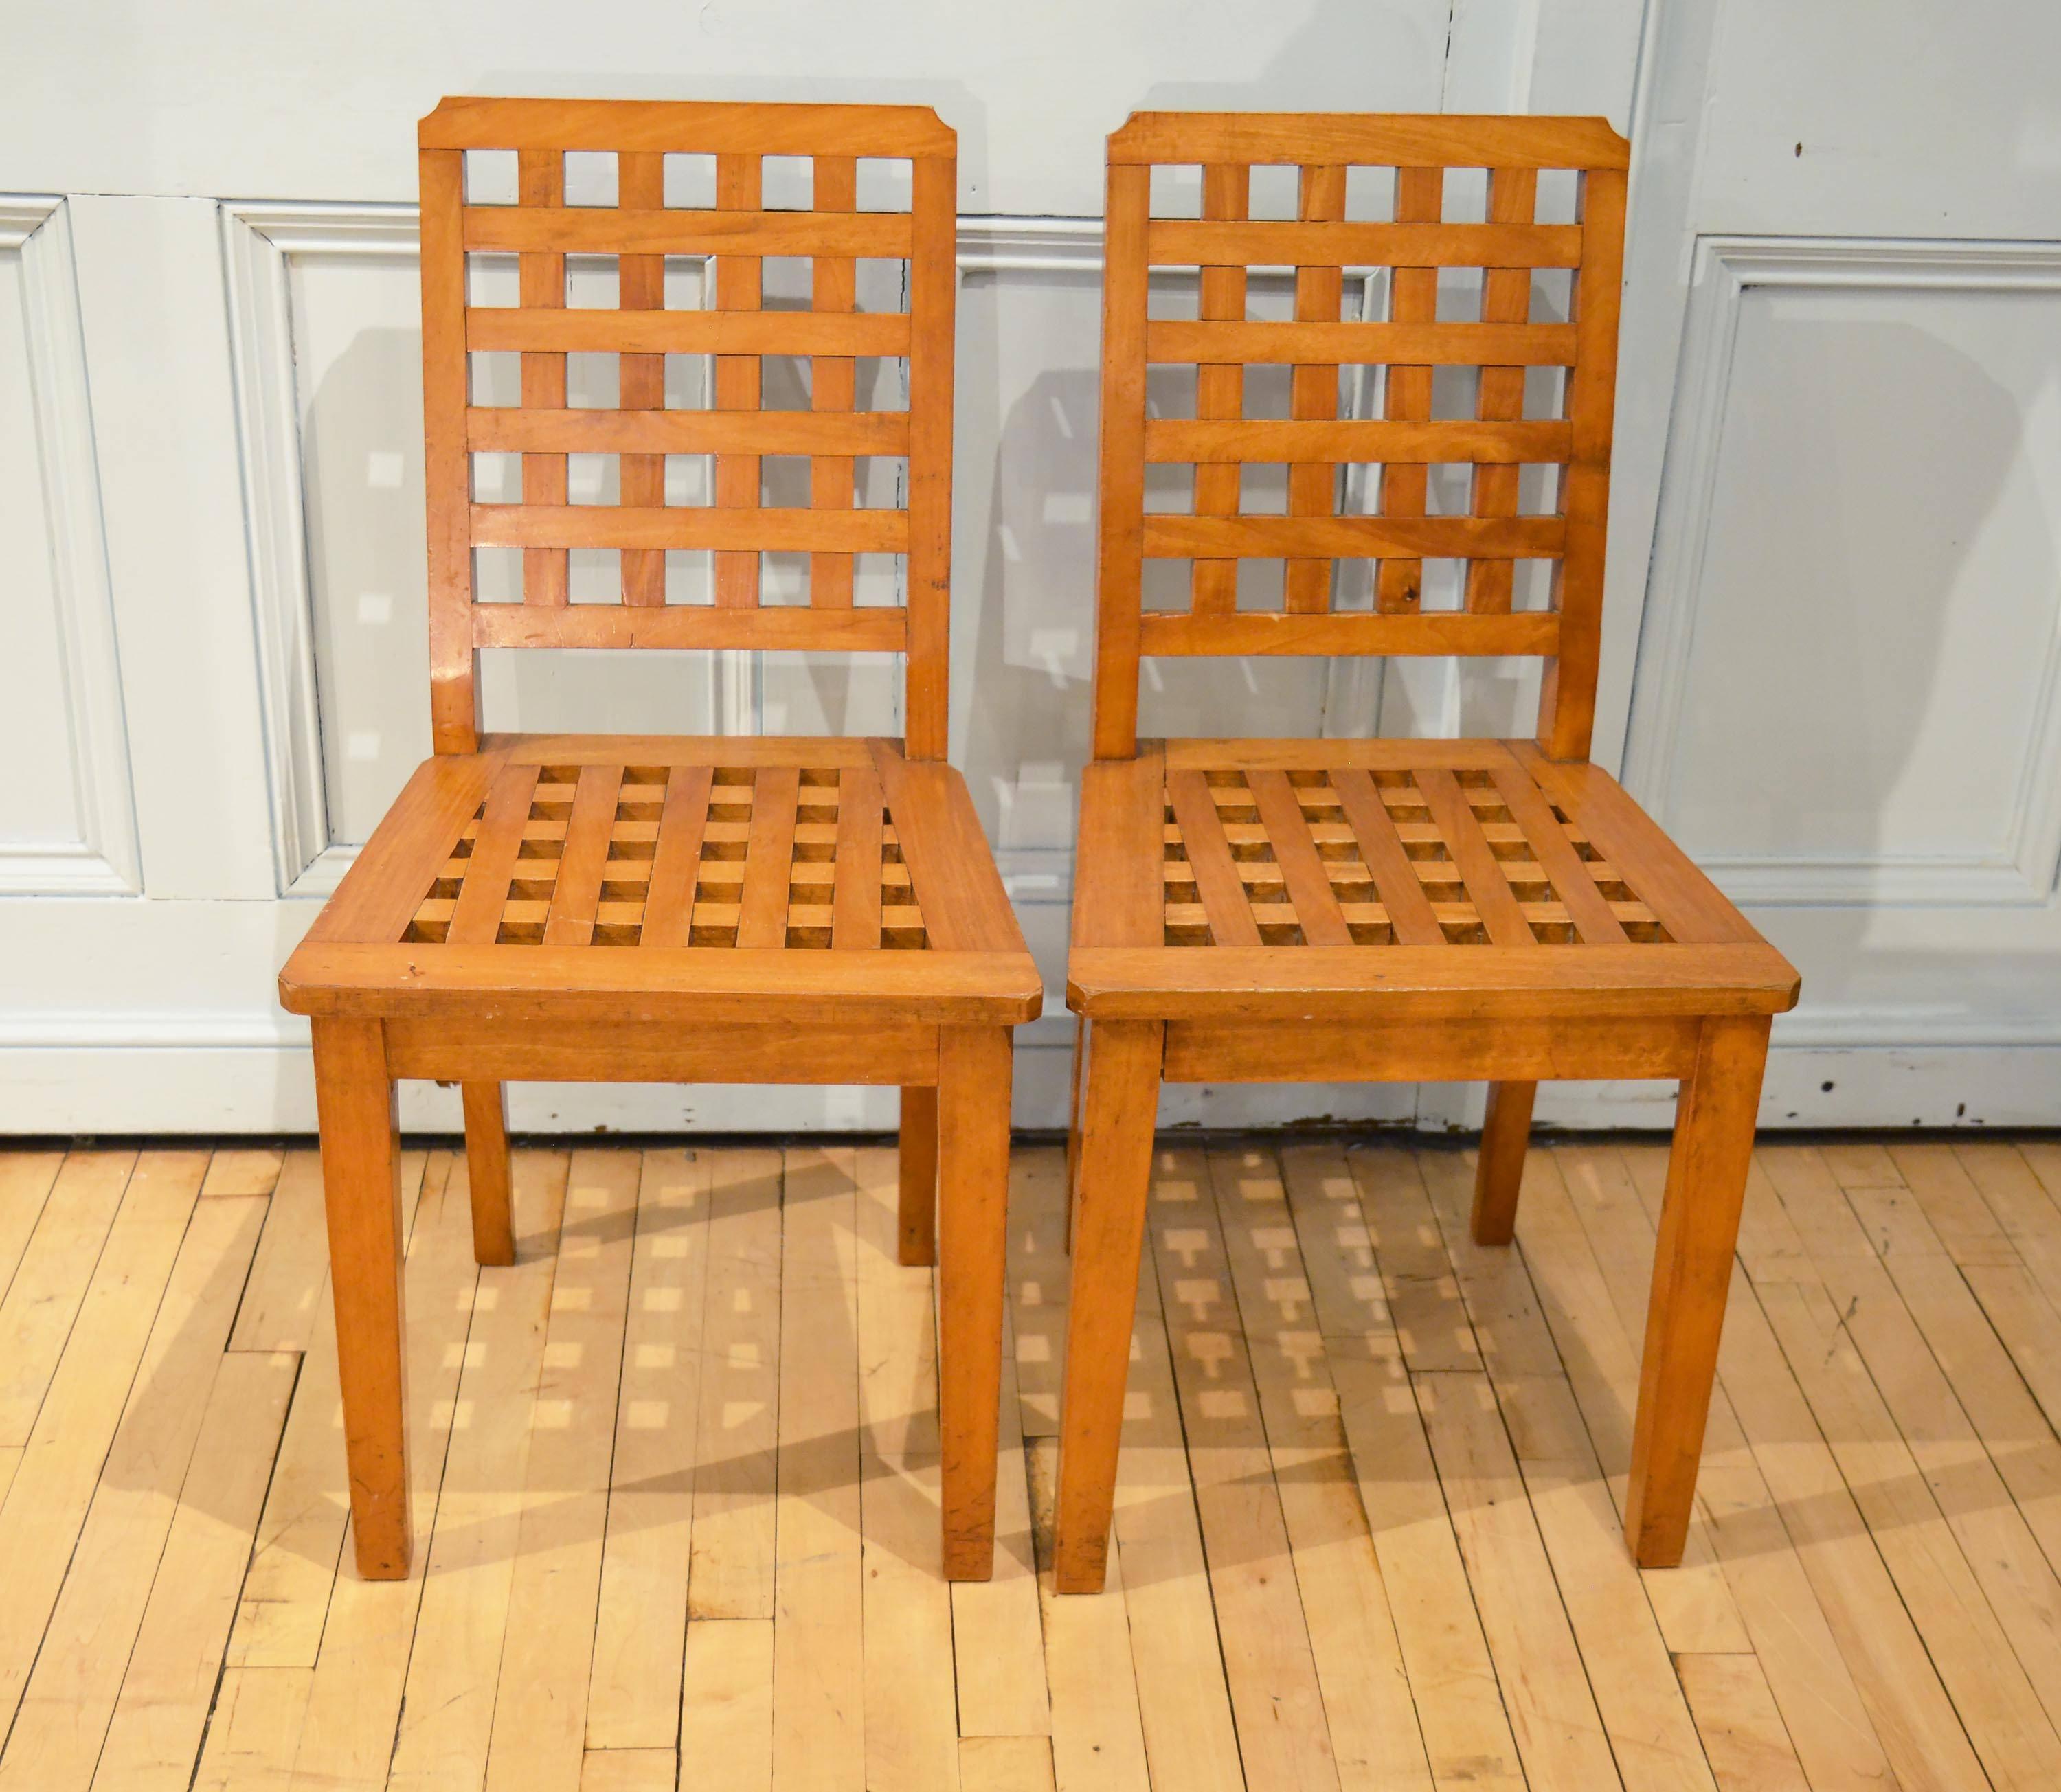 These very attractive and sturdy English side chairs are made of satinwood and mid-20th century in date. The chairs have a stylish lattice pattern on the back splat and seat. Each chair measures 18 in - 45 cm in width, 19 in - 48 cm in depth and 34